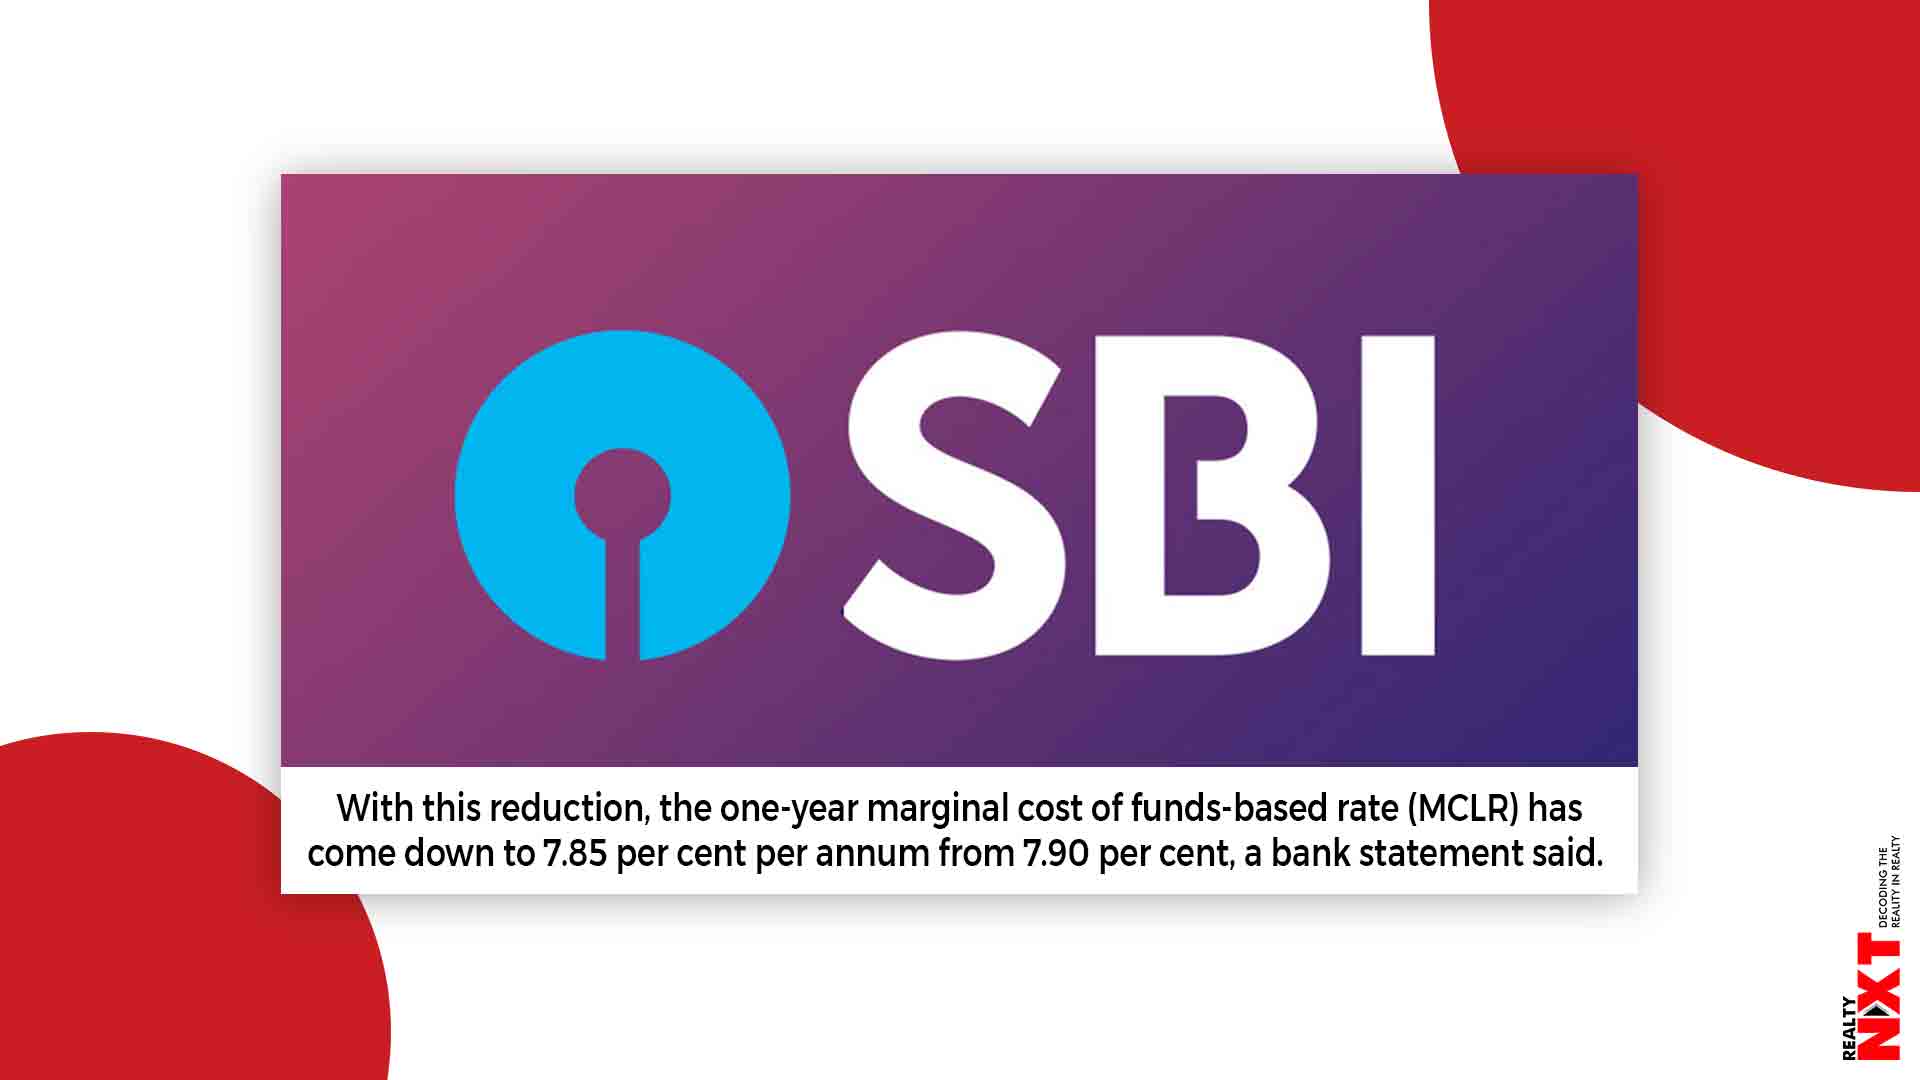 Sbi Announced 5 Basis Points Bps Reduction In Its Mclr Across Tenors Realtynxt 5551